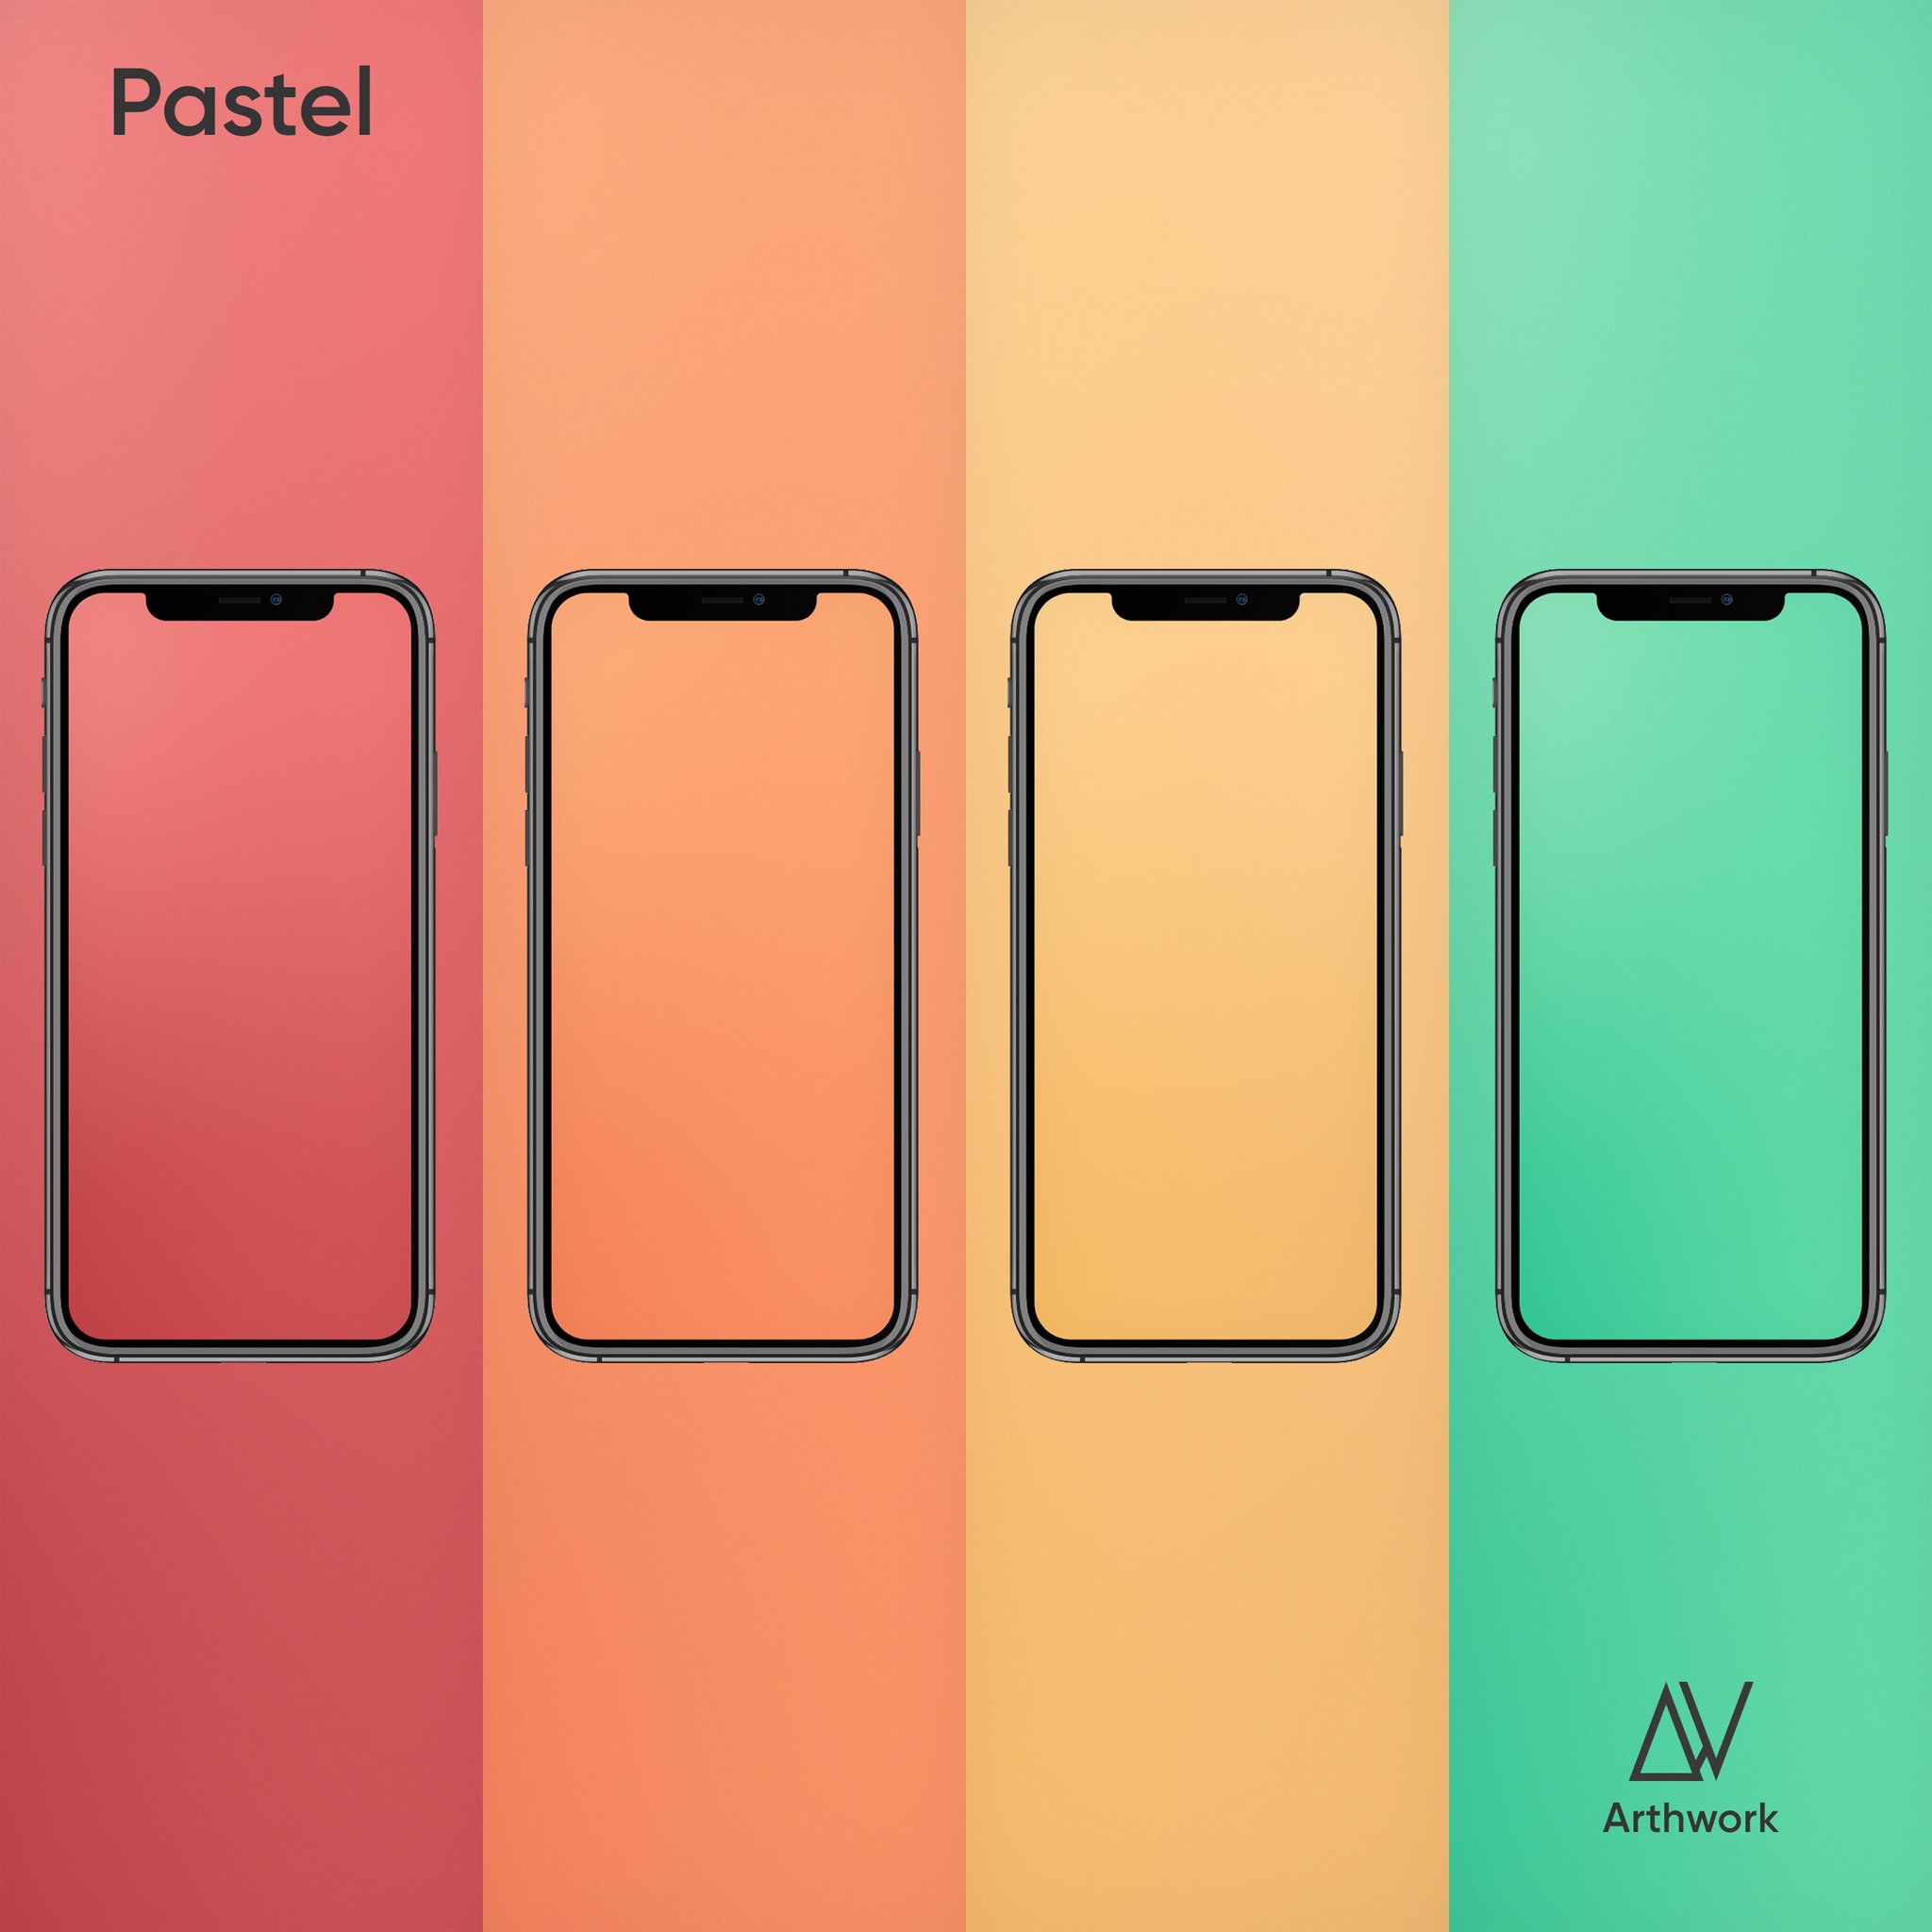 Pastel wallpapers for iPhone and iPad